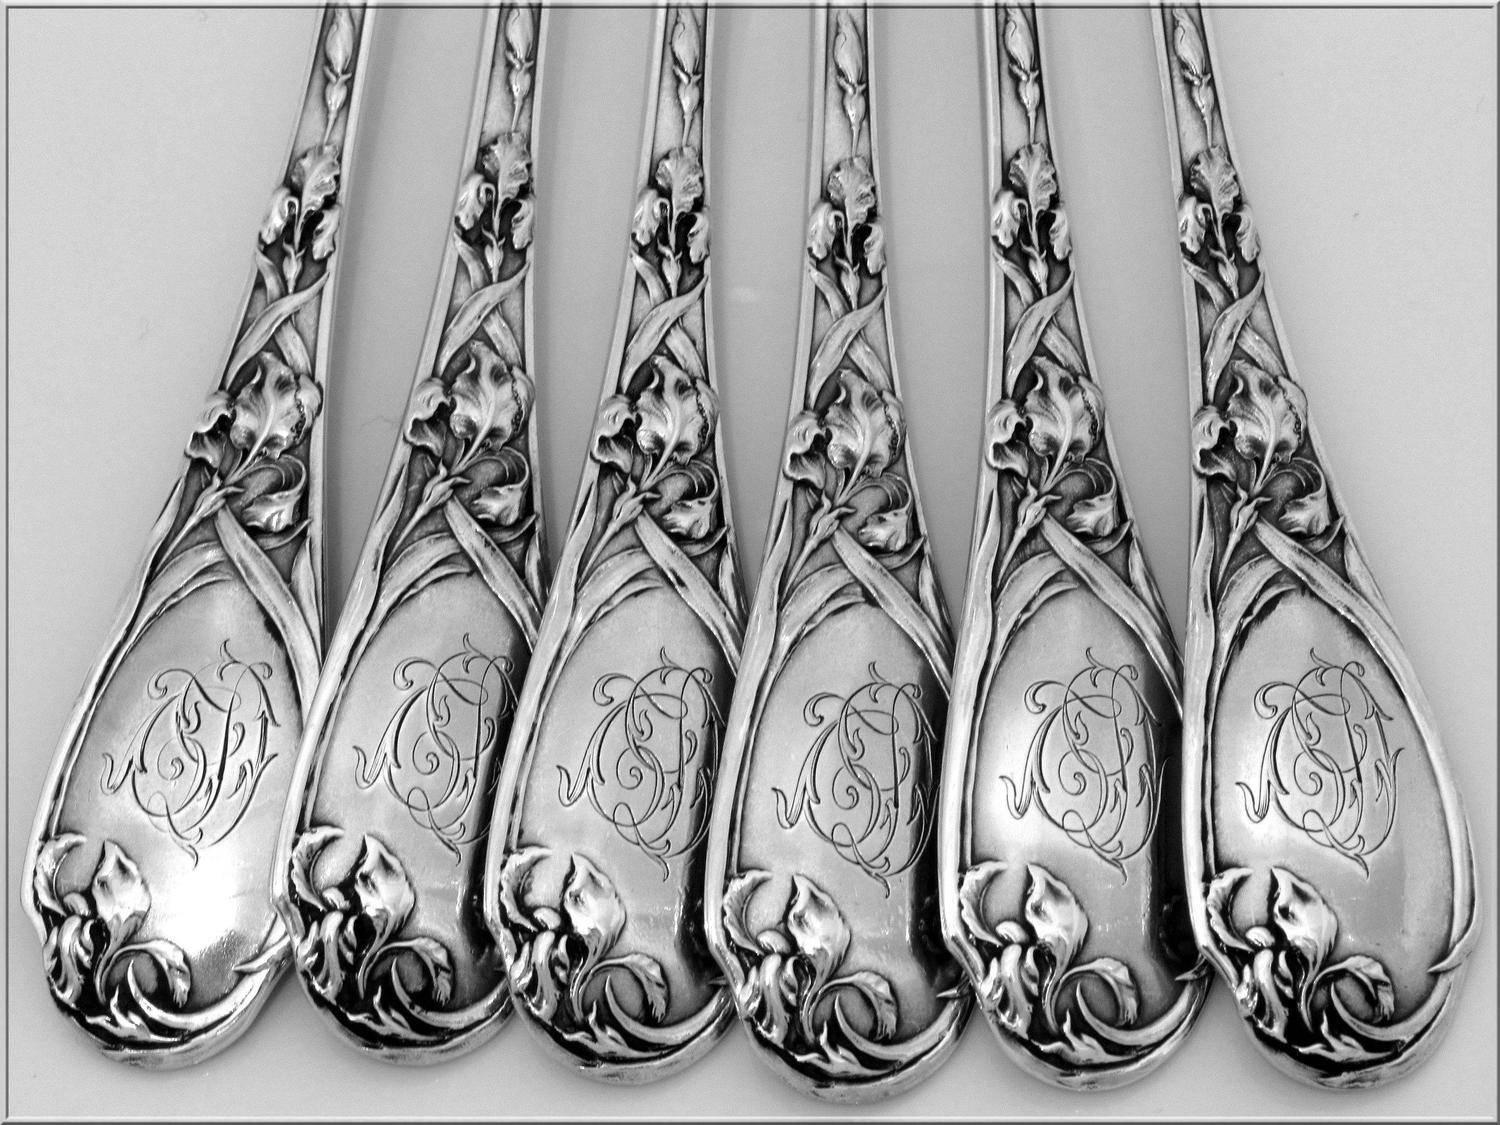 Late 19th Century Puiforcat Fabulous French Sterling Silver Dinner Forks Set Six Pieces Iris